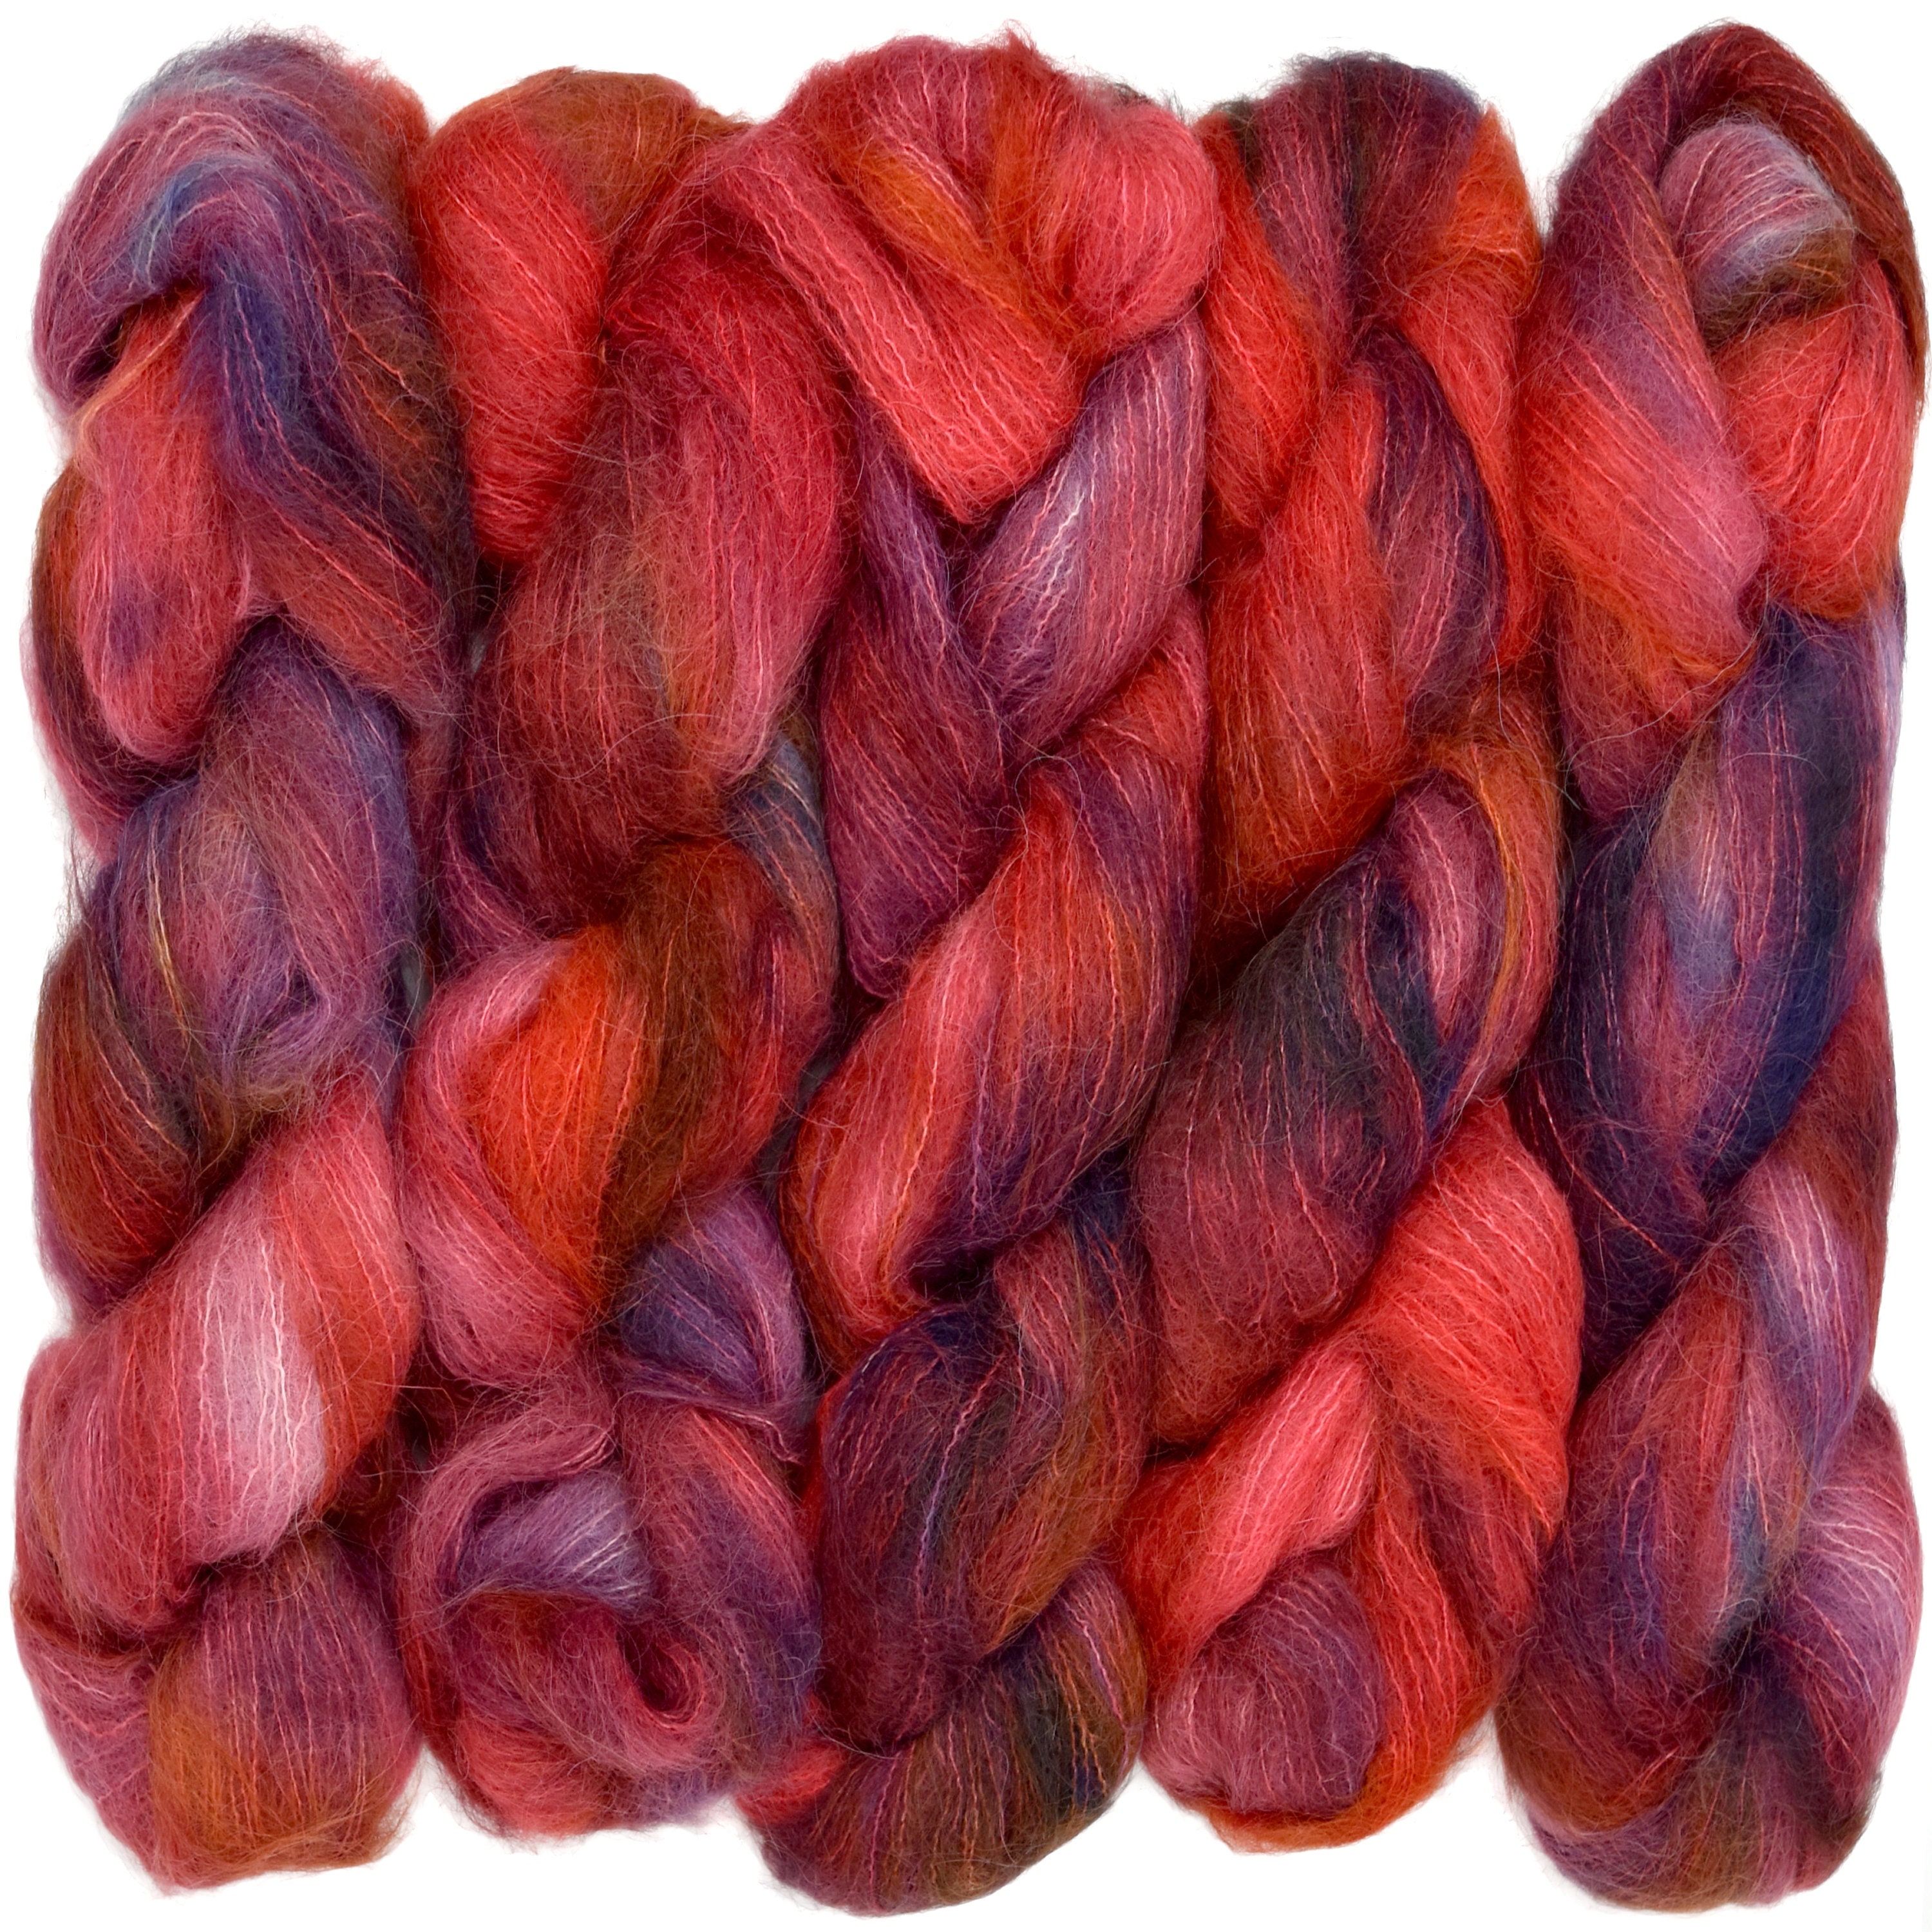 No Need to Stitch and Itch: Tips for Choosing Wool Yarn